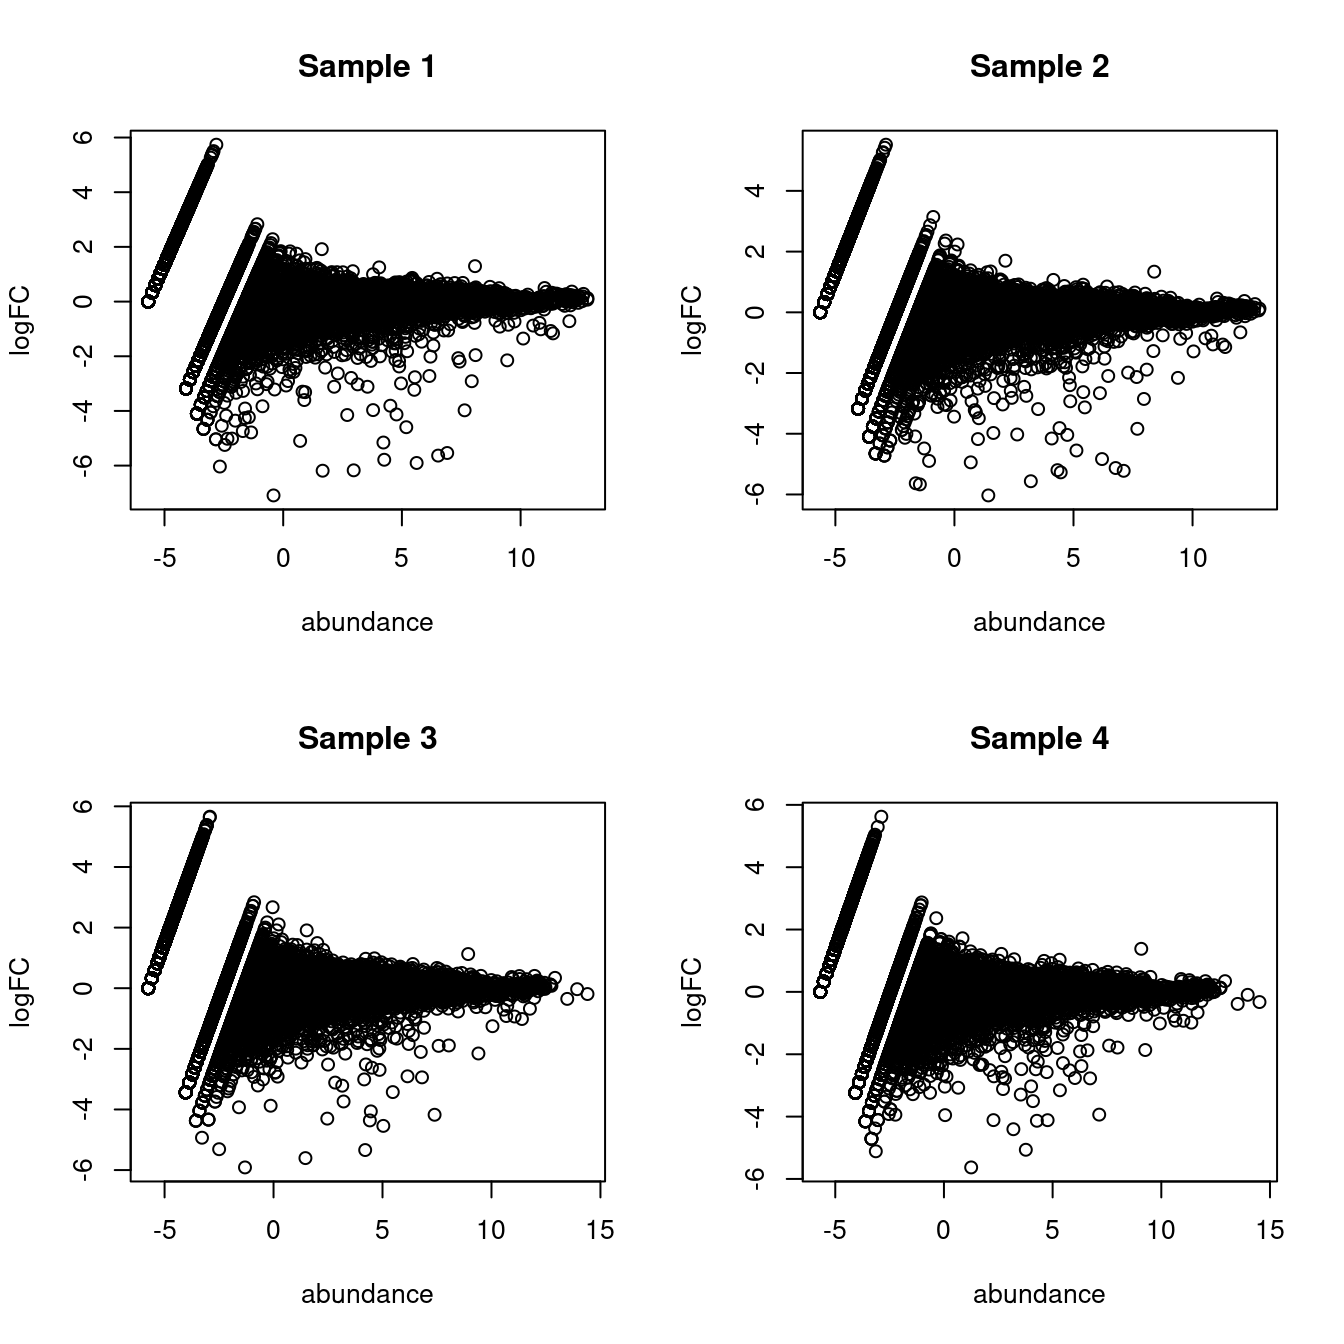 MA plots of the log-fold change of the proxy ambient profile over the real profile for each sample in the _Tal1_ chimera dataset.